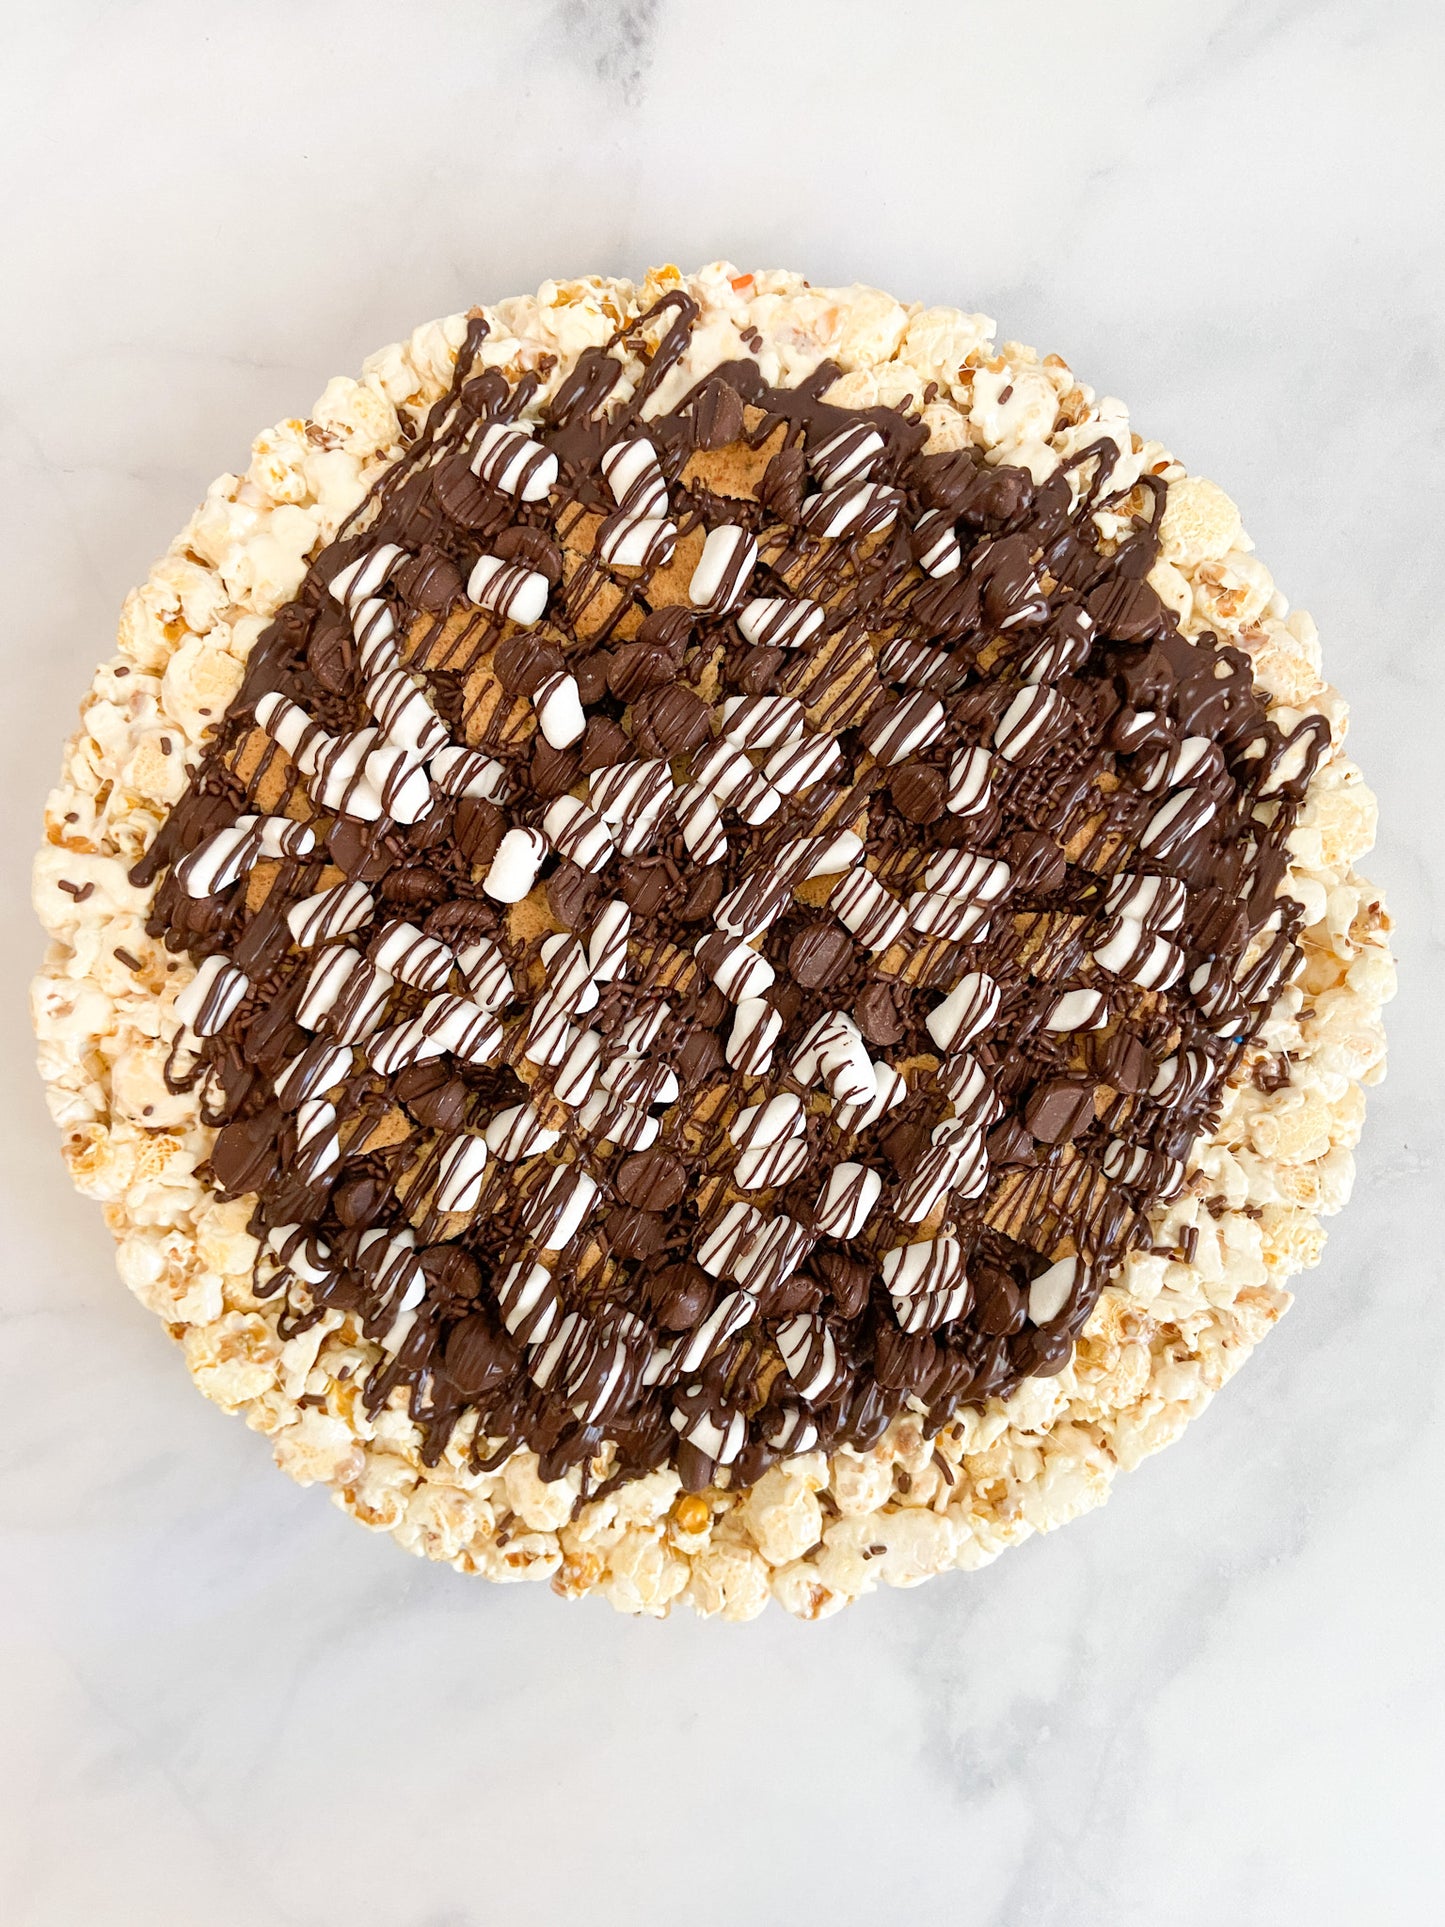 S'mores Lover's Gourmet Popcorn Pizza